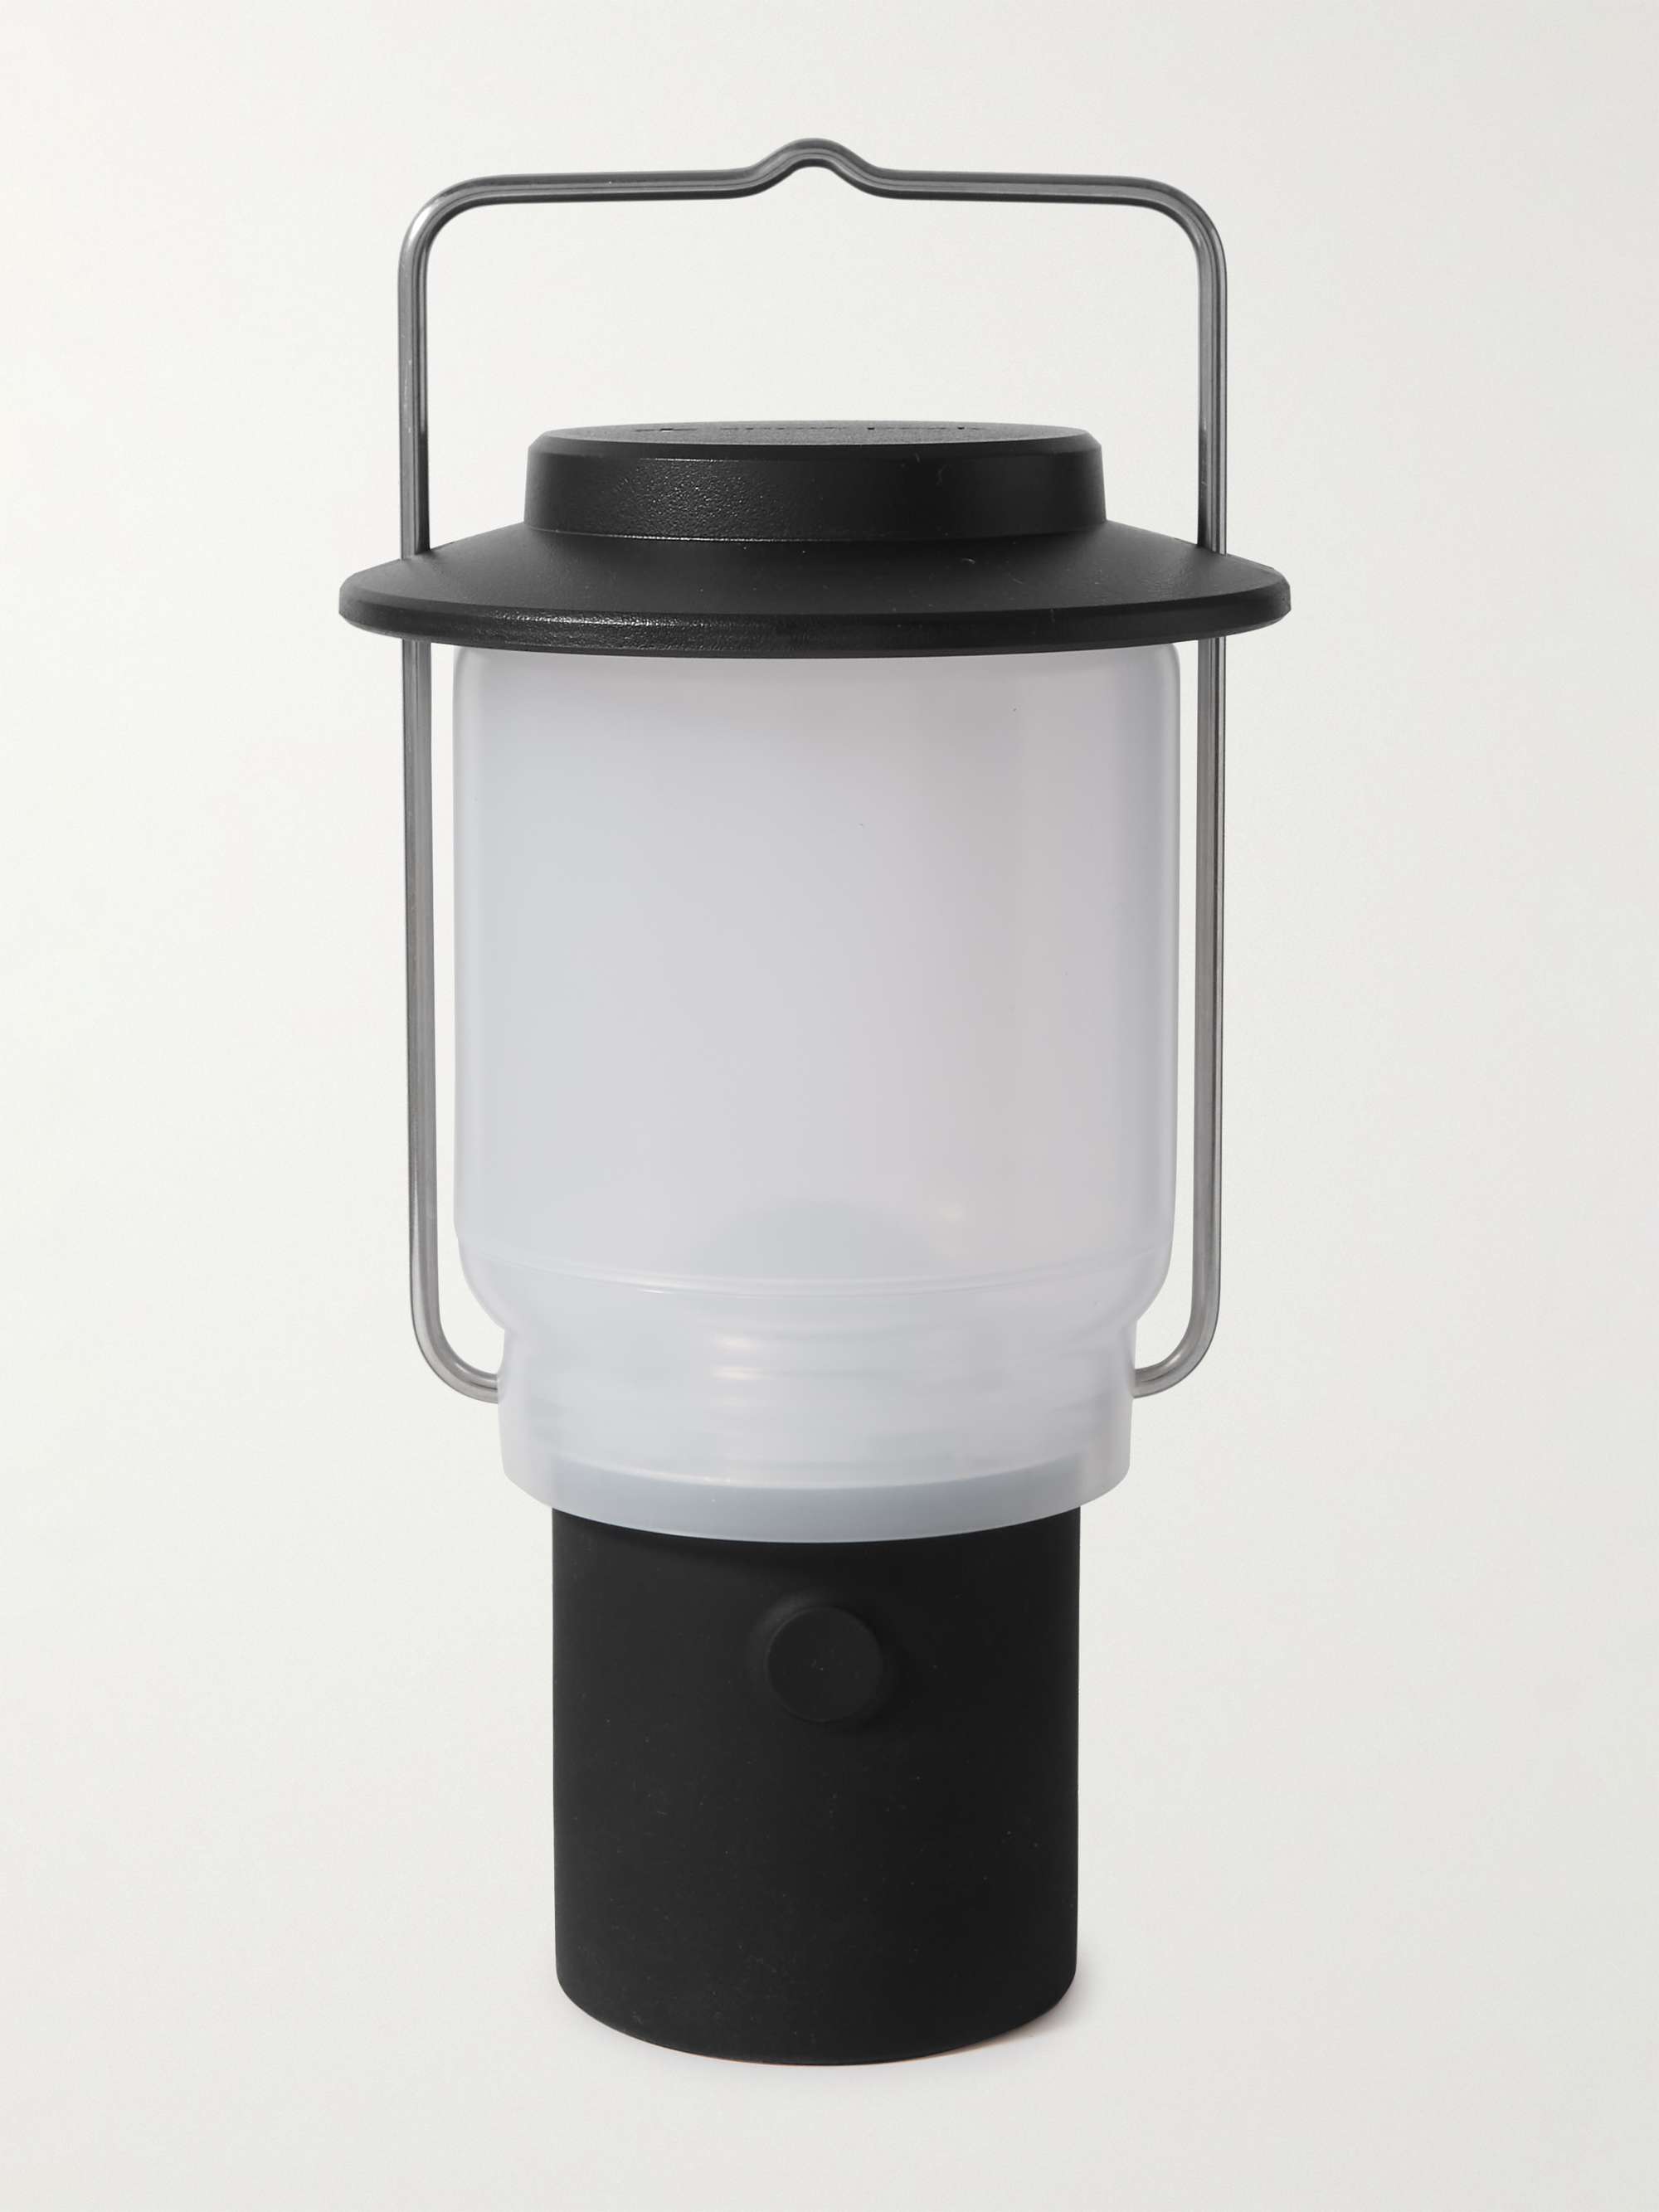 SNOW PEAK Home & Camp Resin and Stainless Steel Portable Lantern